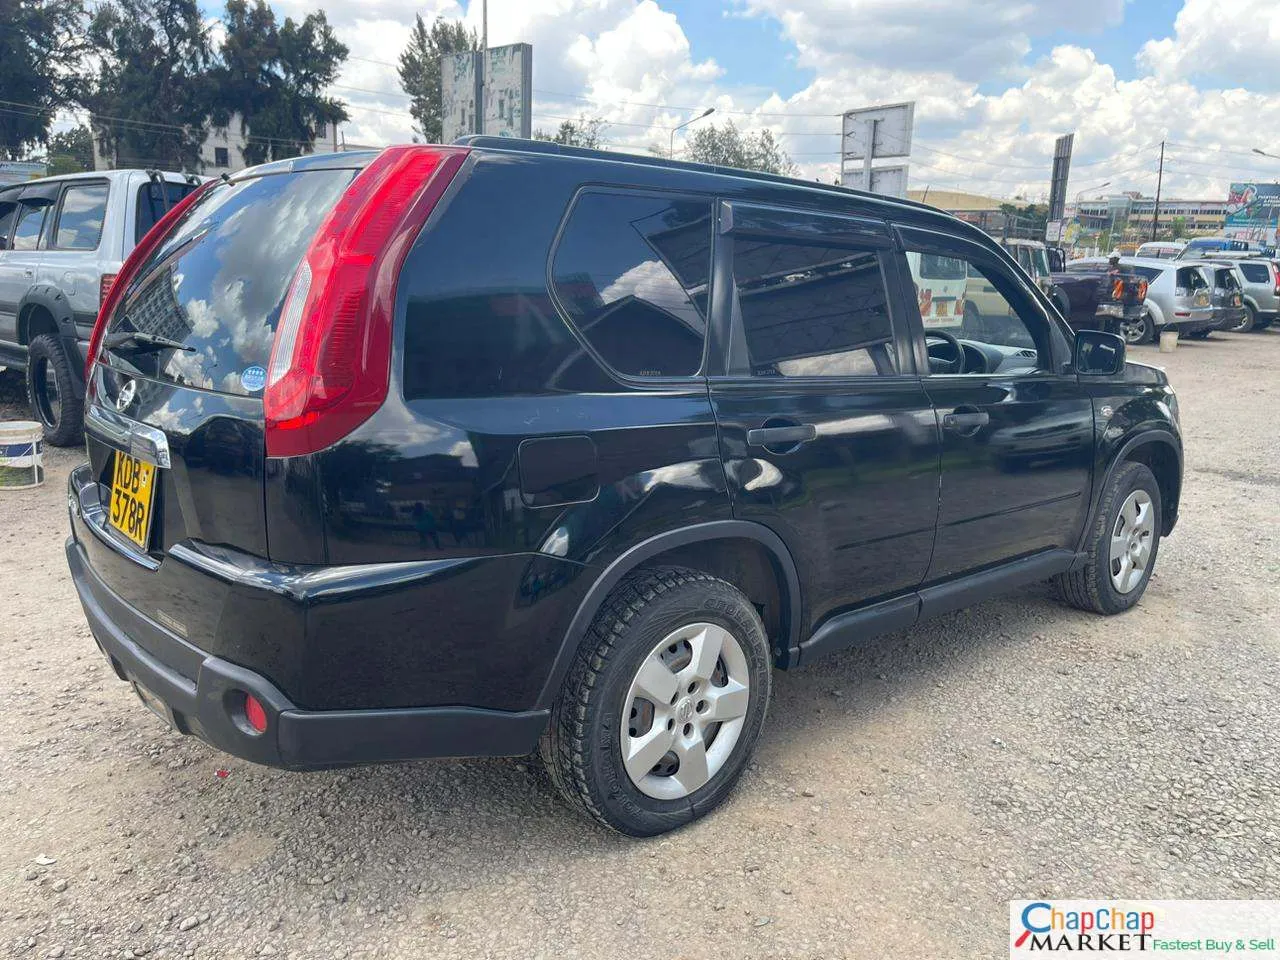 Cars Cars For Sale-Nissan XTRAIL Pay 30% Deposit Trade in Ok Wow! Xtrail for sale in kenya Hire purchase installments 7